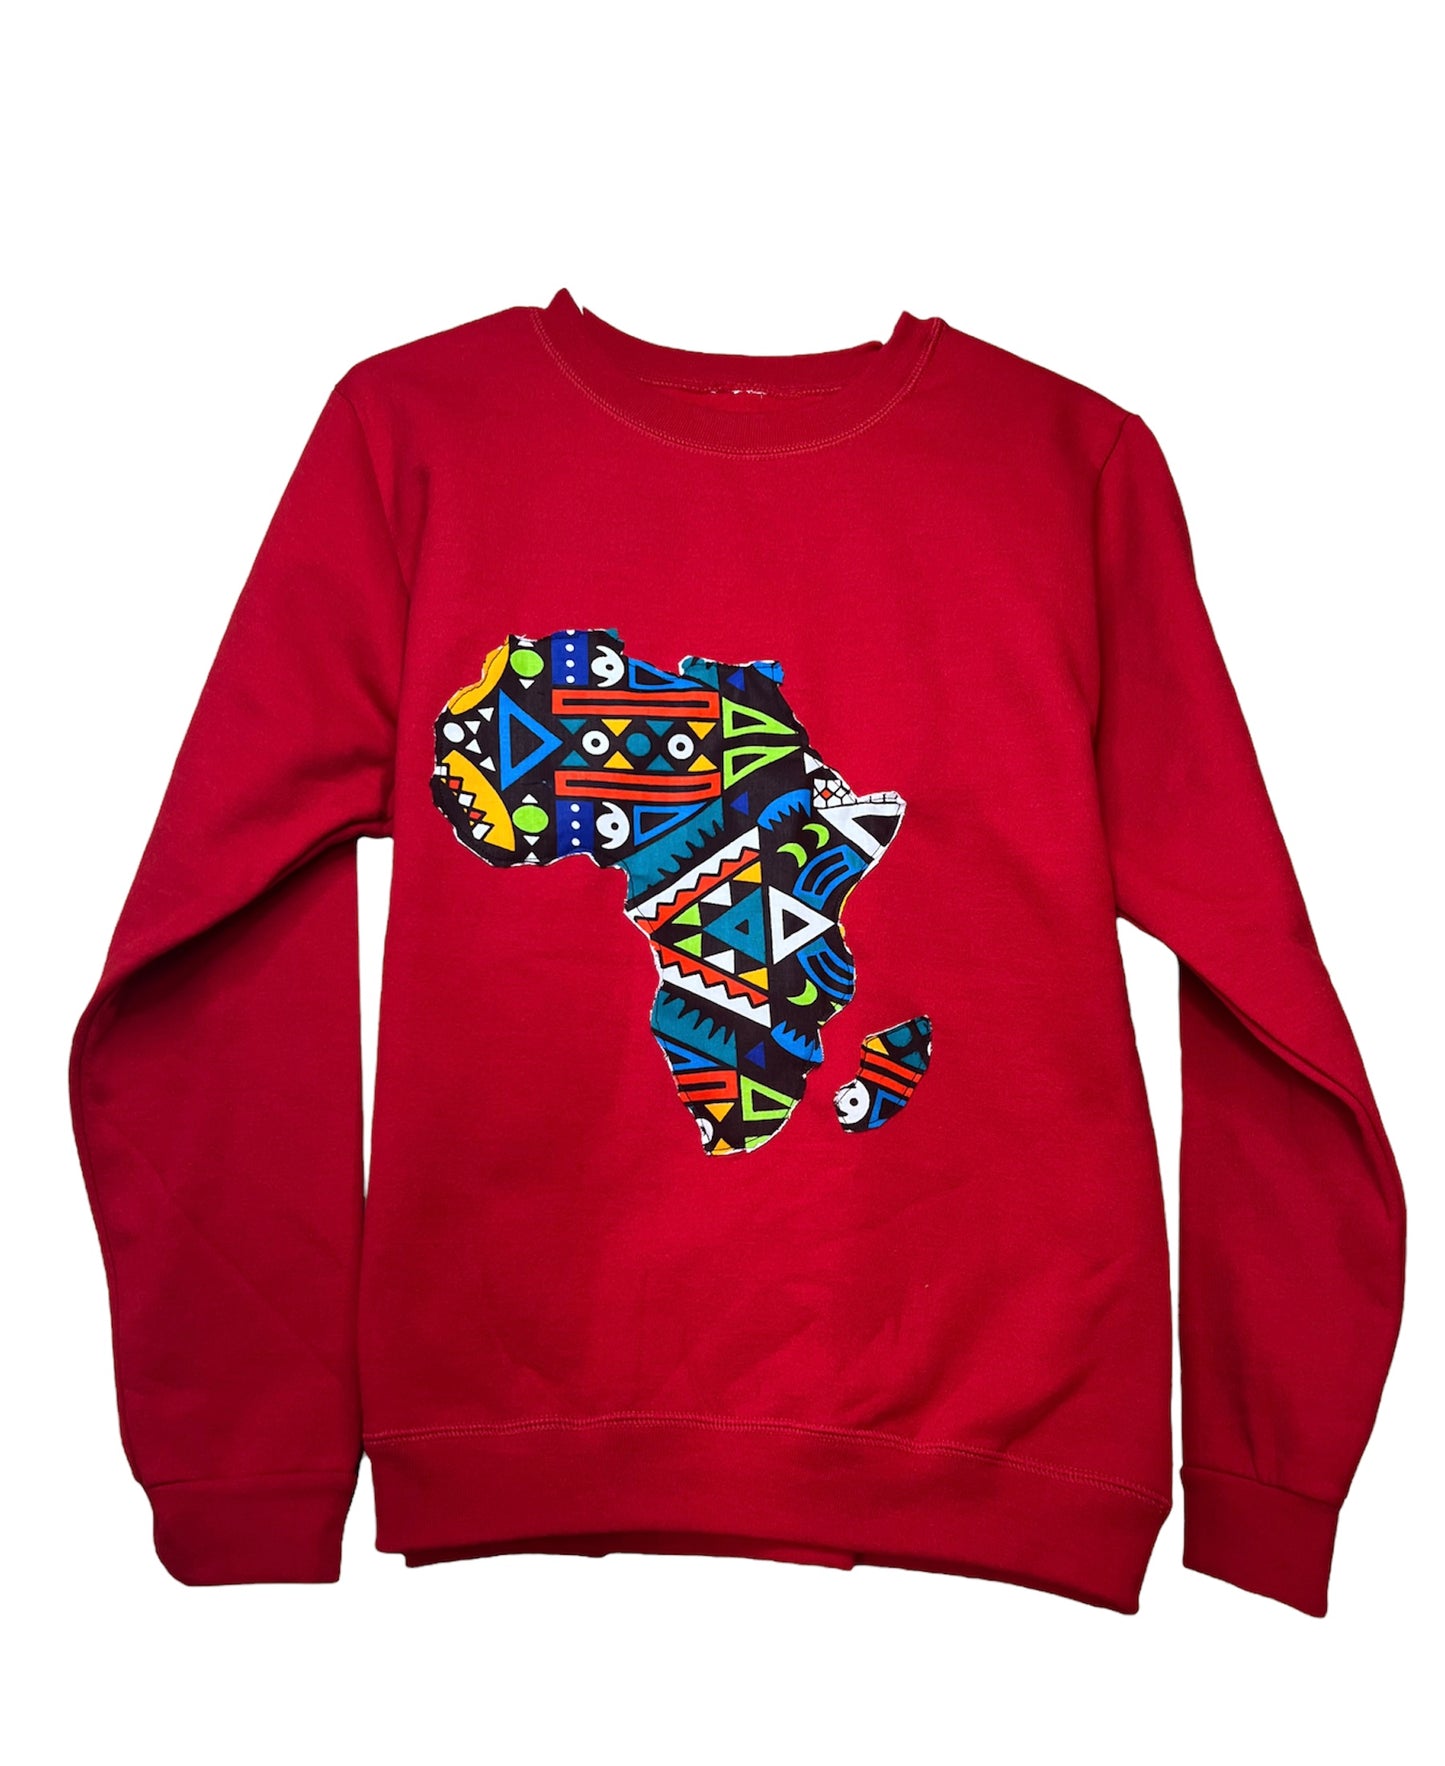 Red Long Sleeve Sweatshirt with Vibrant Tribal Print African Map